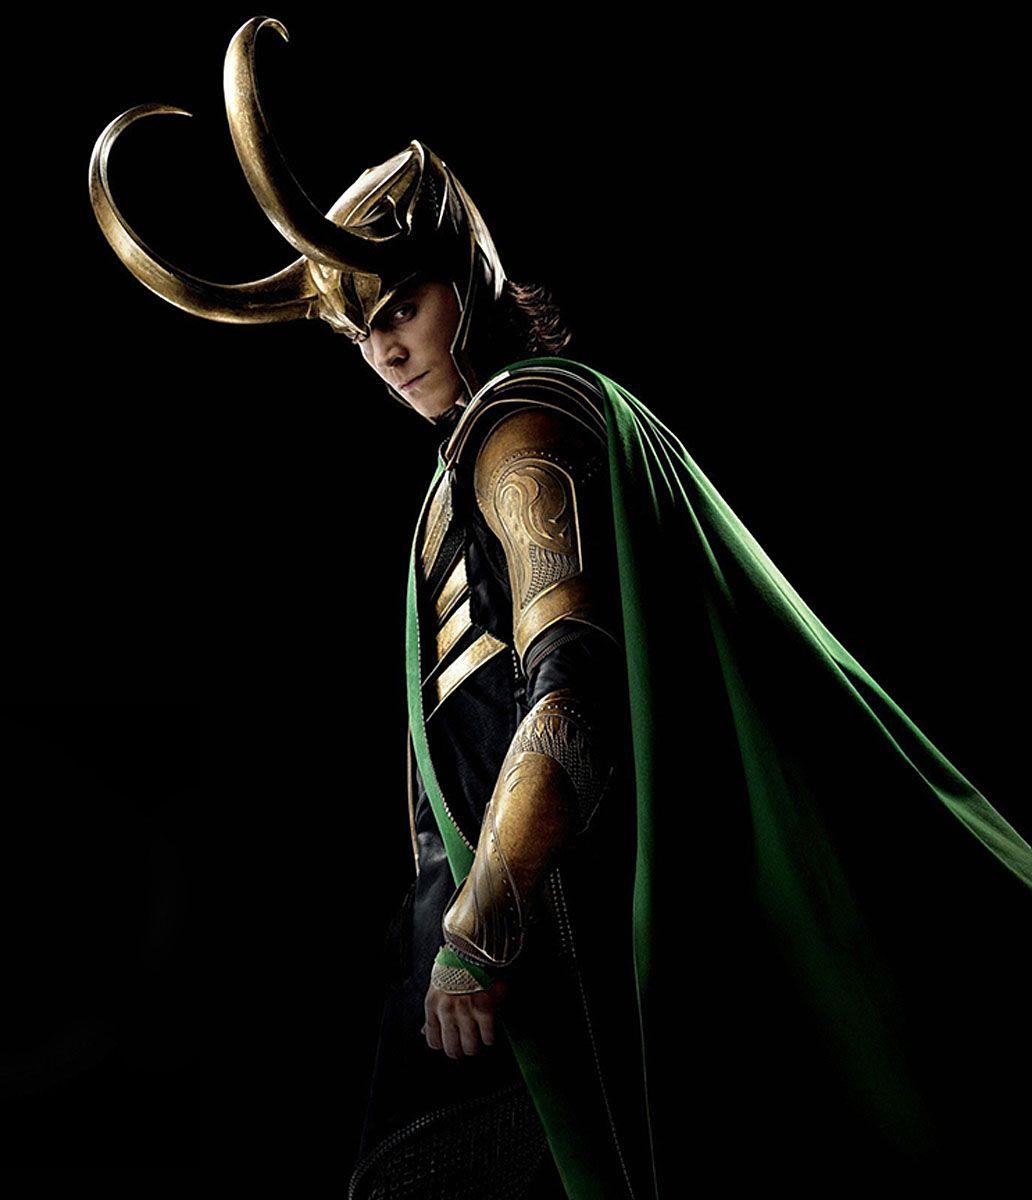 Loki Wallpaper for PC. Full HD Picture